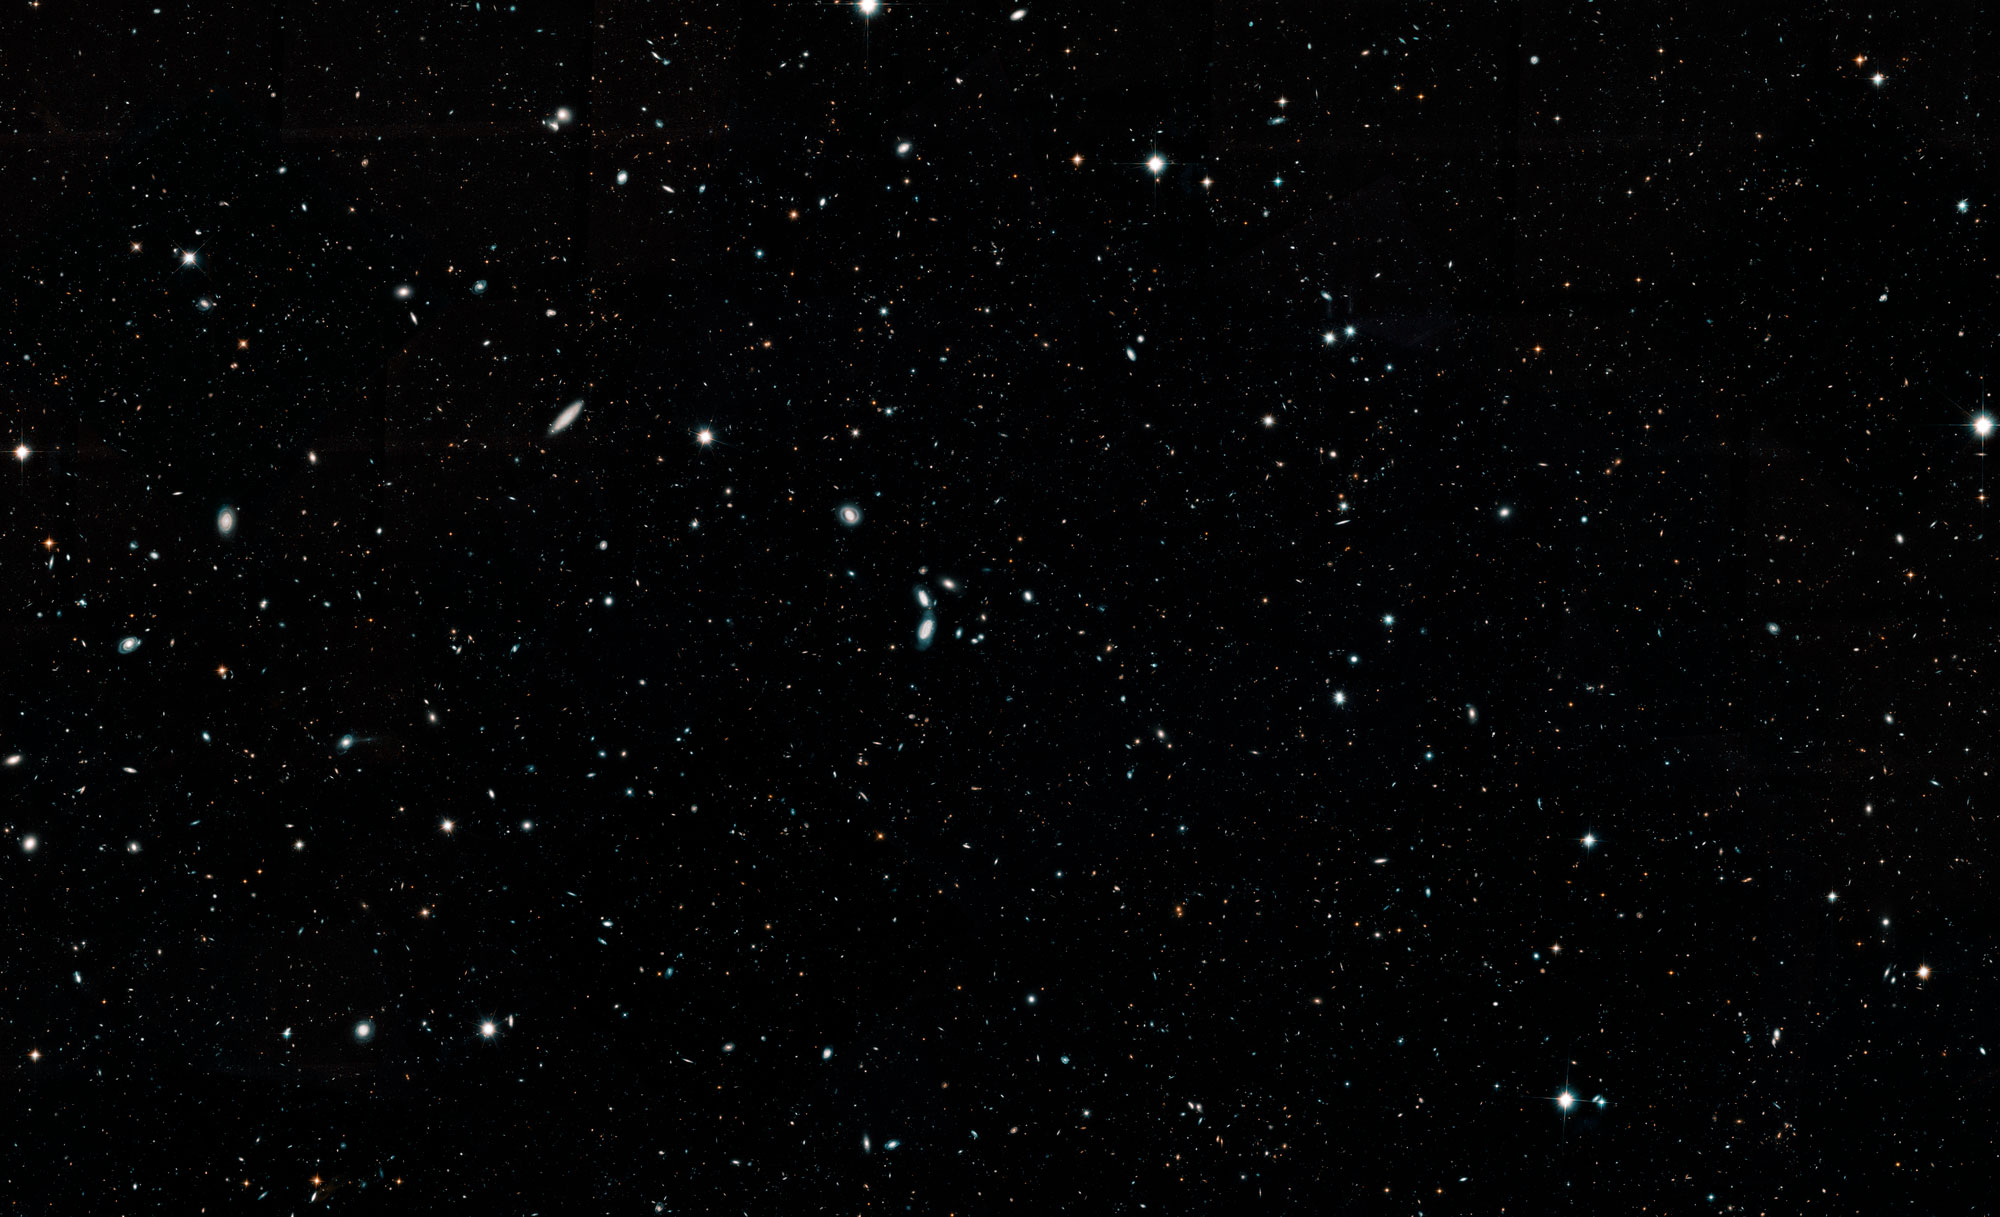 A Hubble Space Telescope image containing 265,000 galaxies